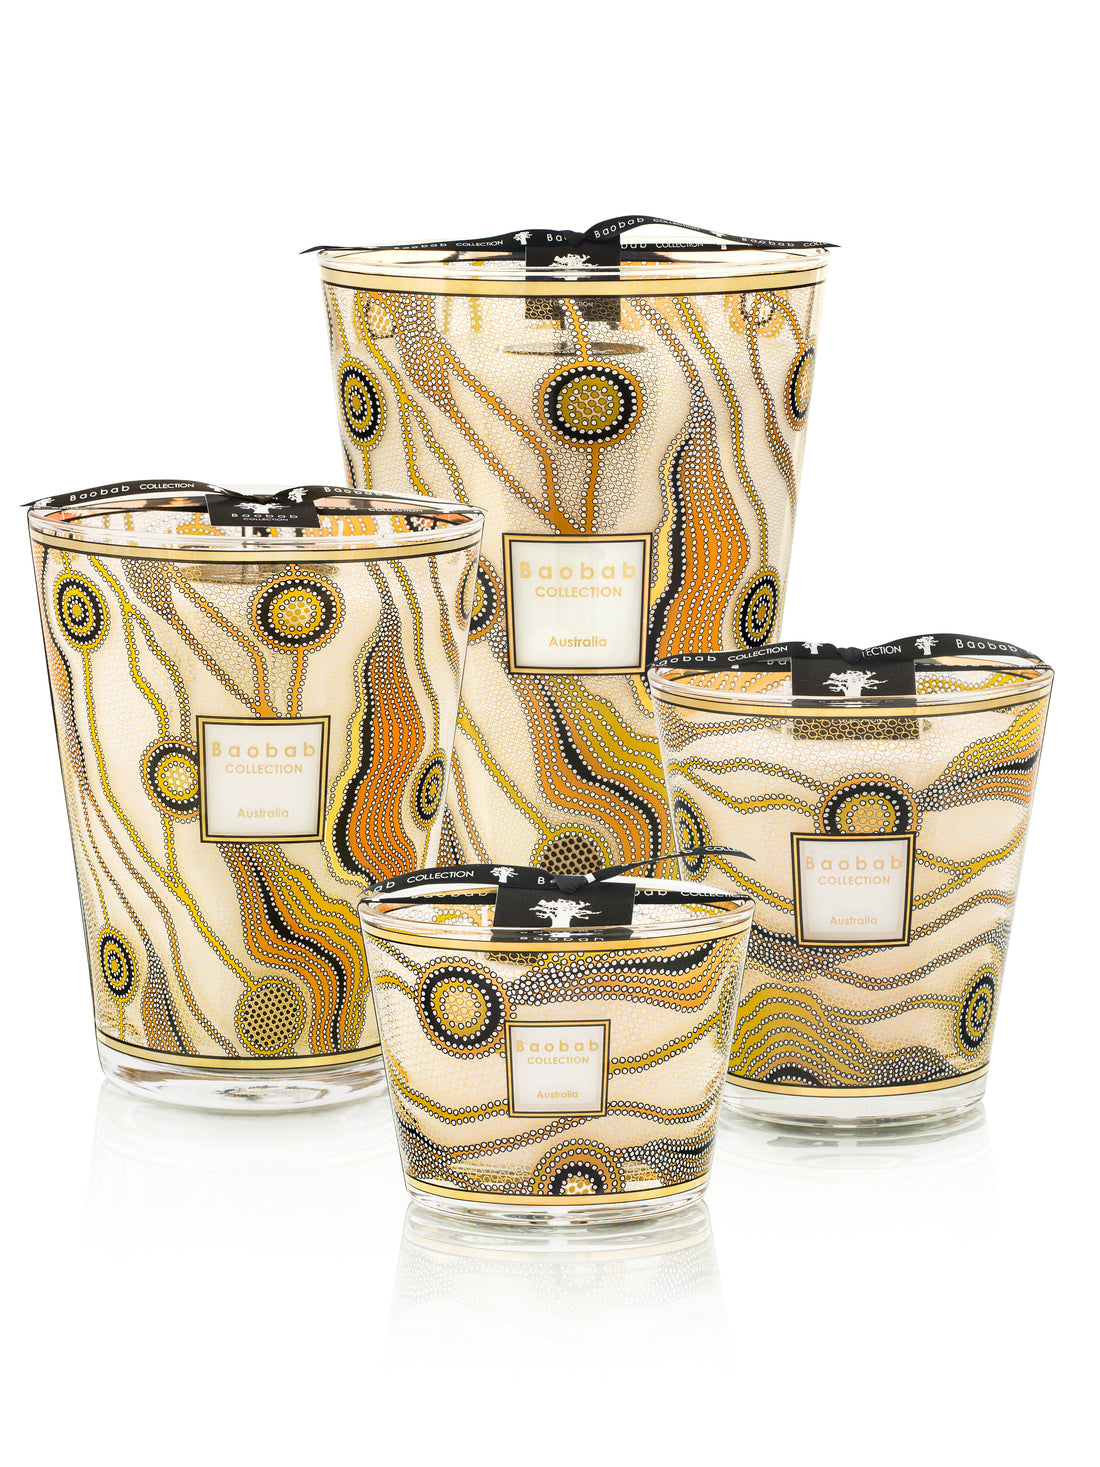 SCENTED CANDLE AUSTRALIA - Baobab Collection